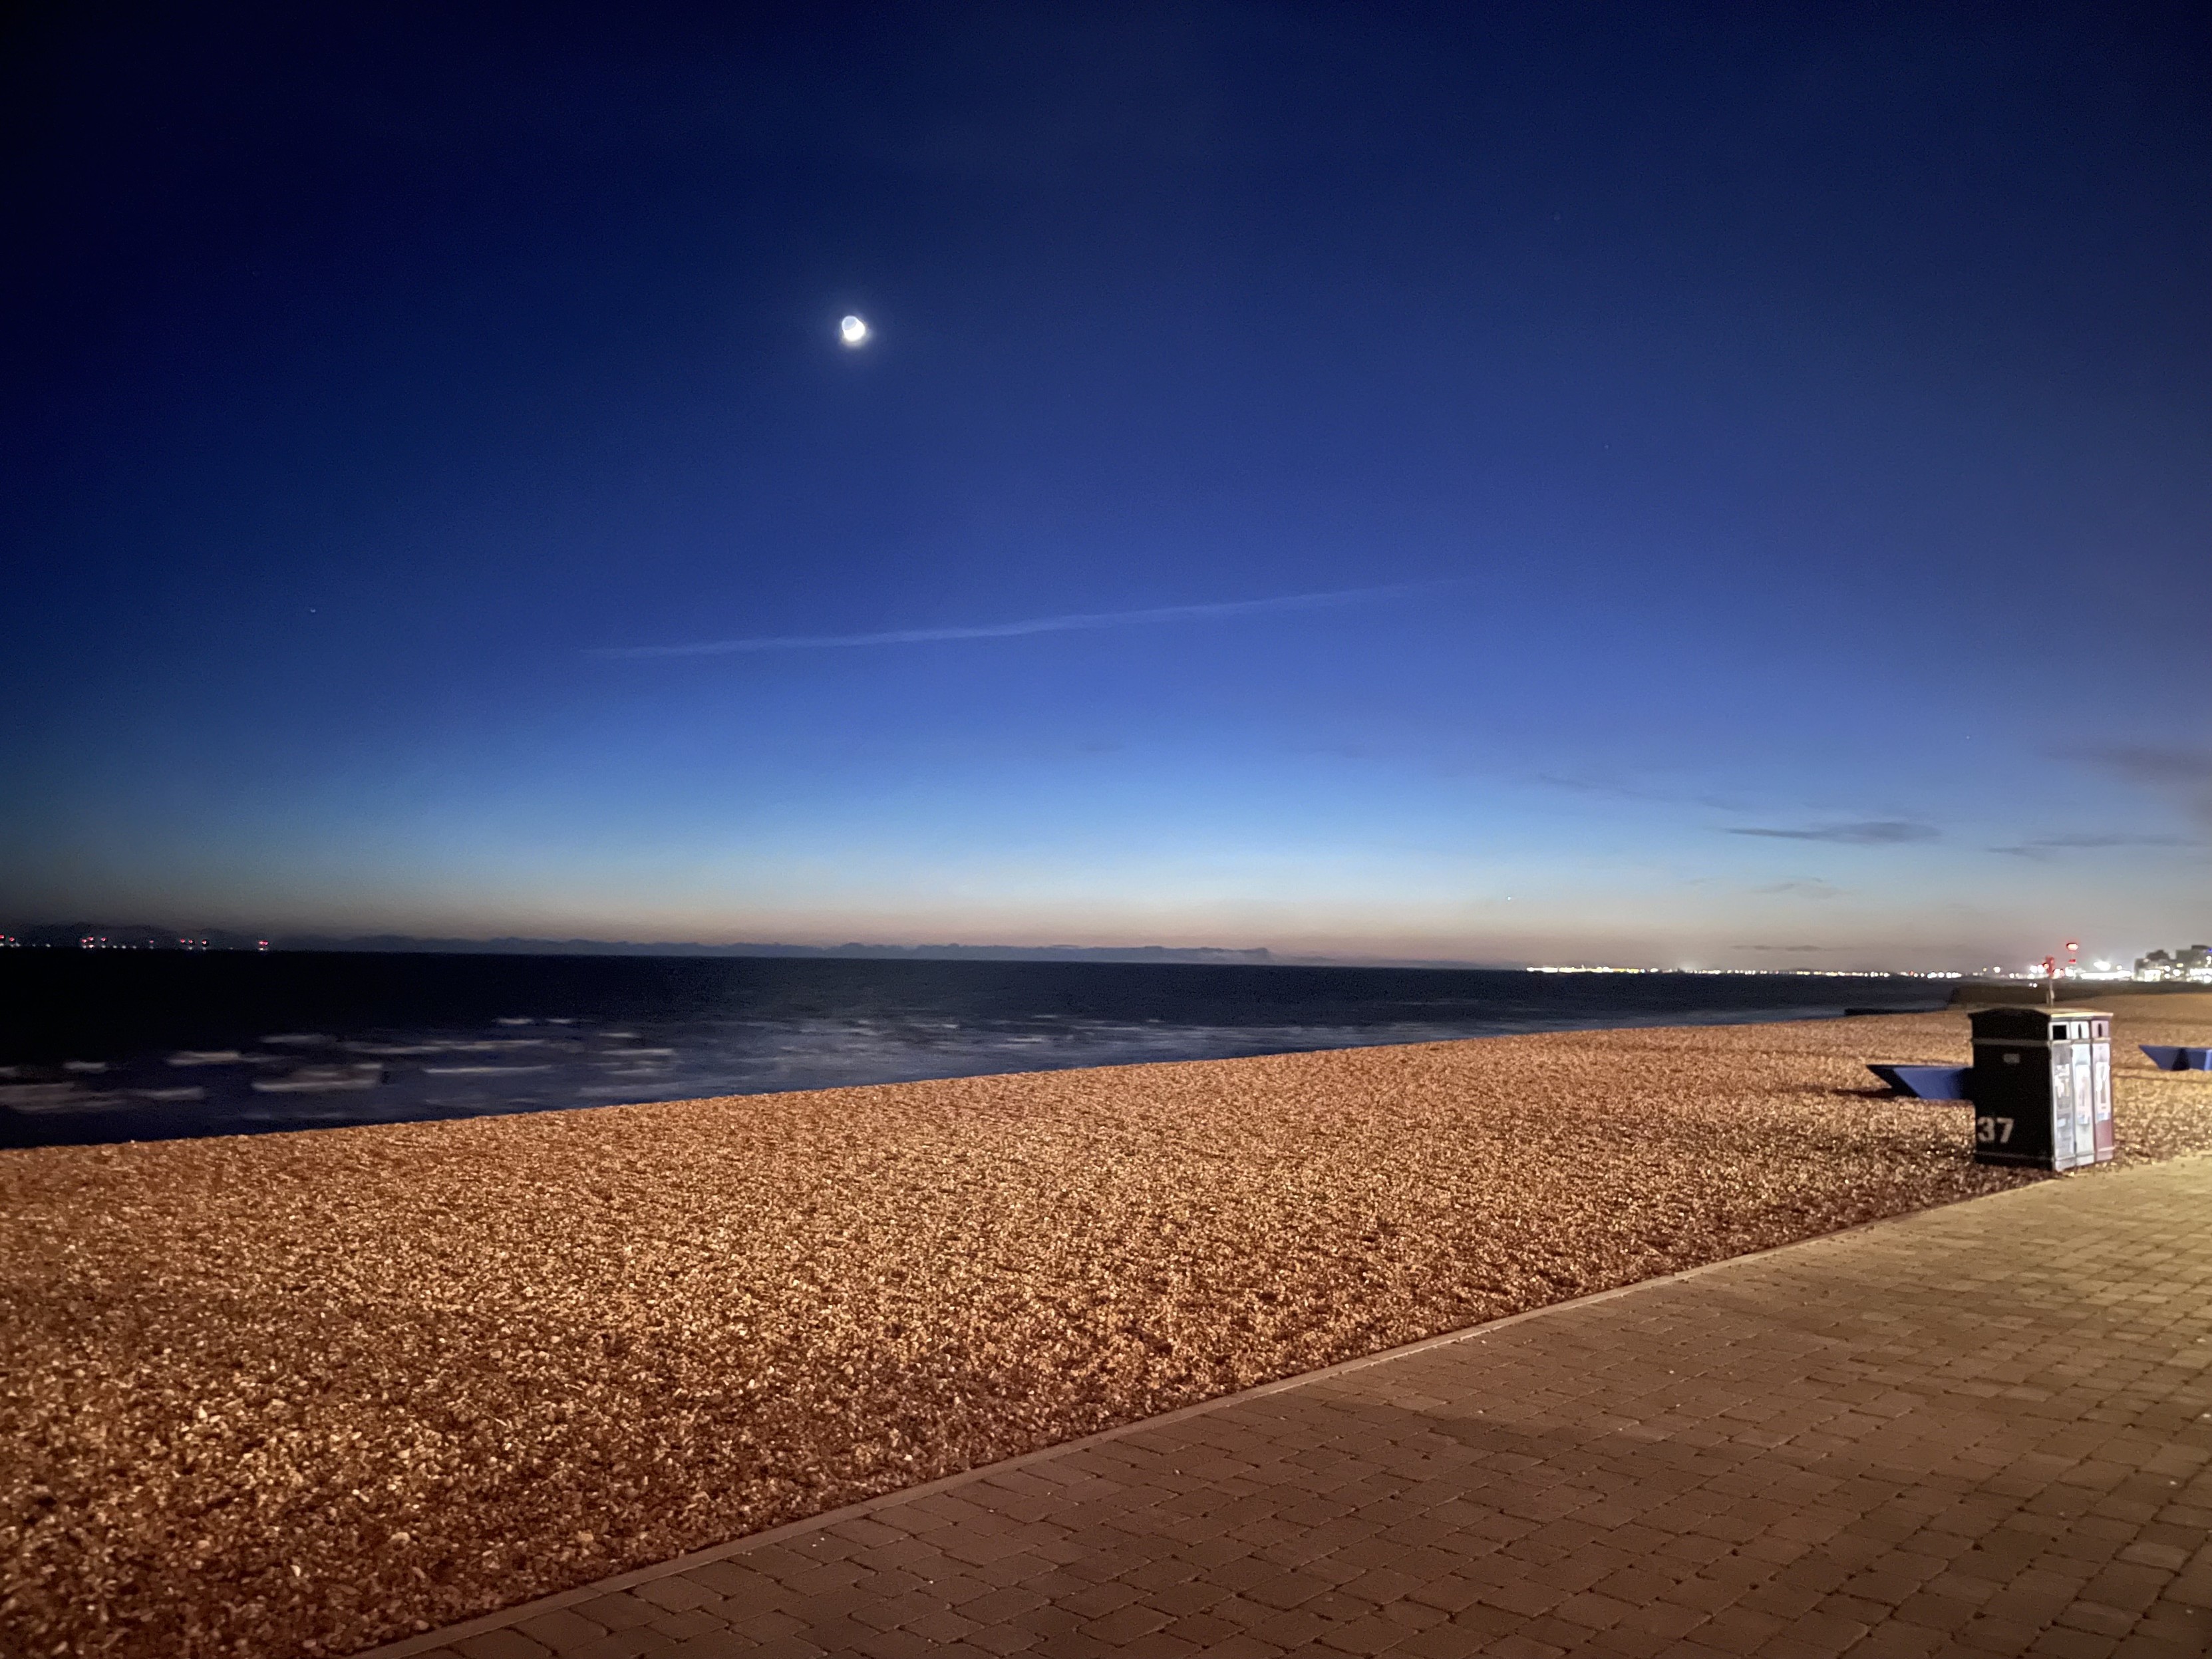 An early evening view of Brighton Beach, looking out over the pebbles with three bins on the right edge of the image, and a thin crescent moon in the sky.